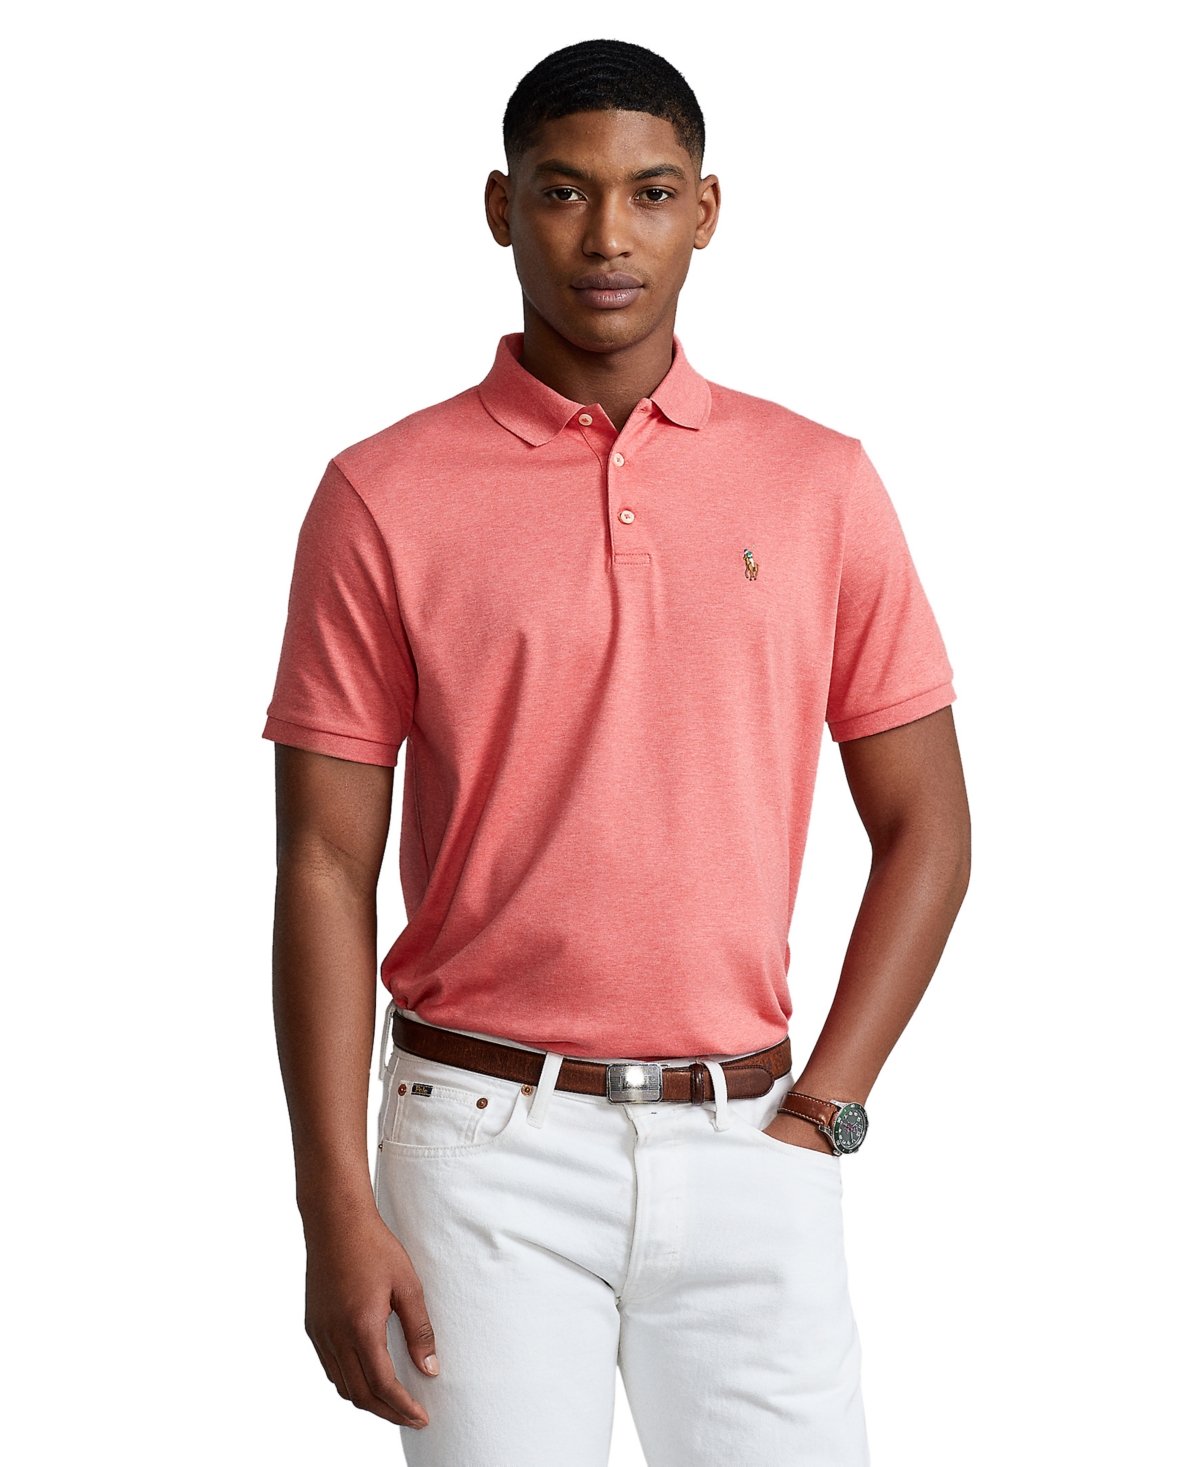 Polo Ralph Lauren Classic Fit Soft Cotton Polo Shirt In Highland Rose Heather